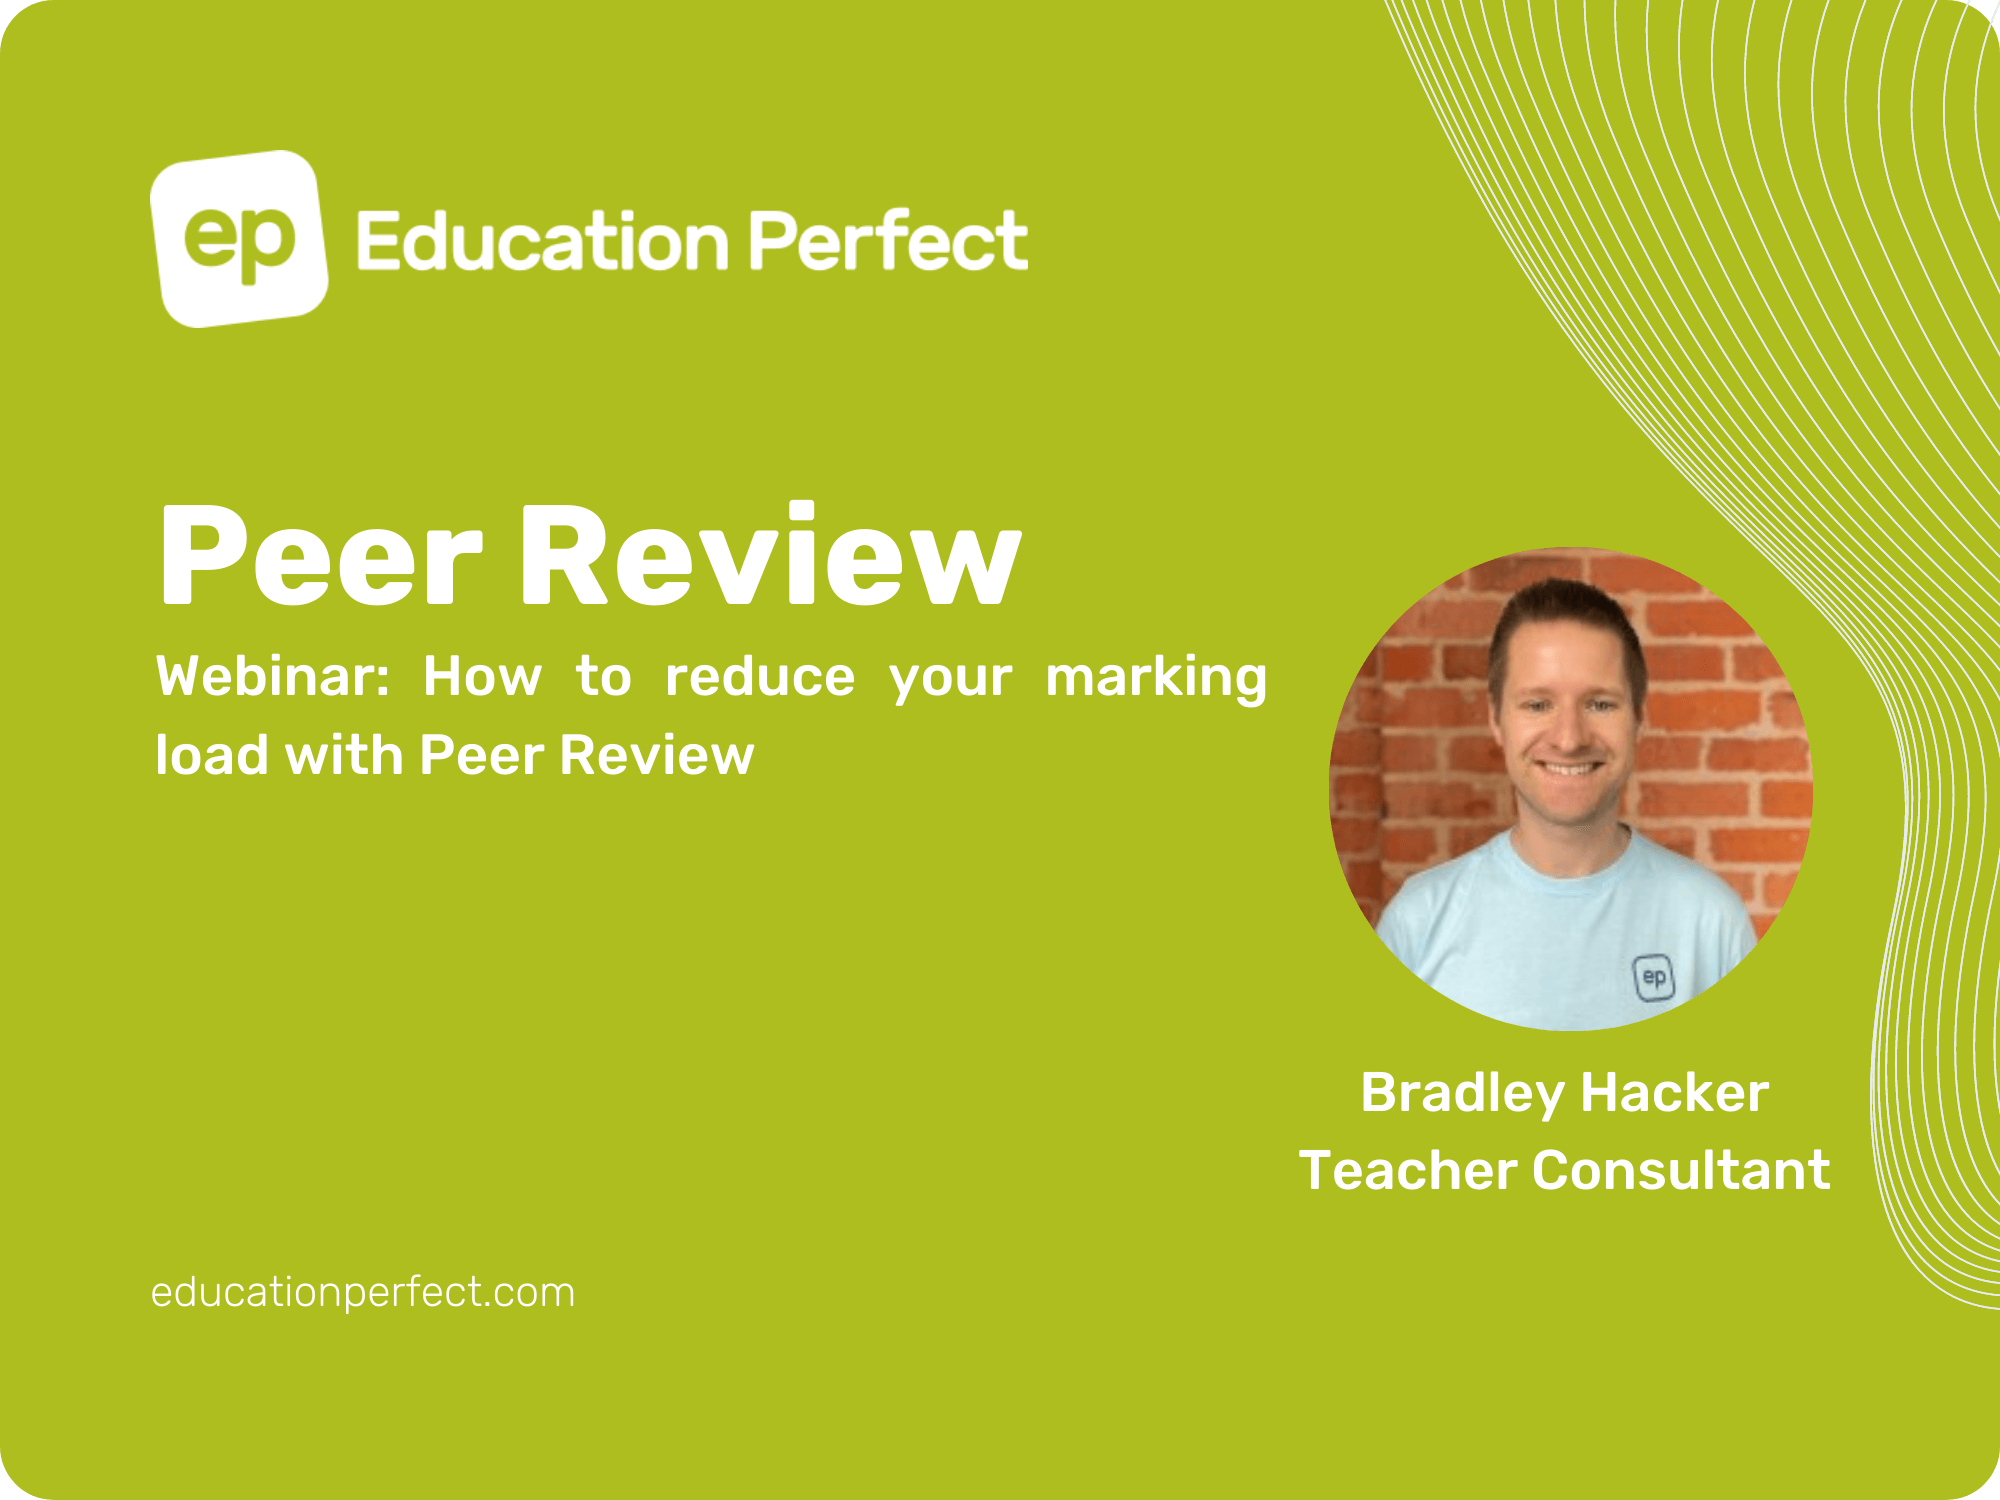 Reduce your marking load with Peer Review